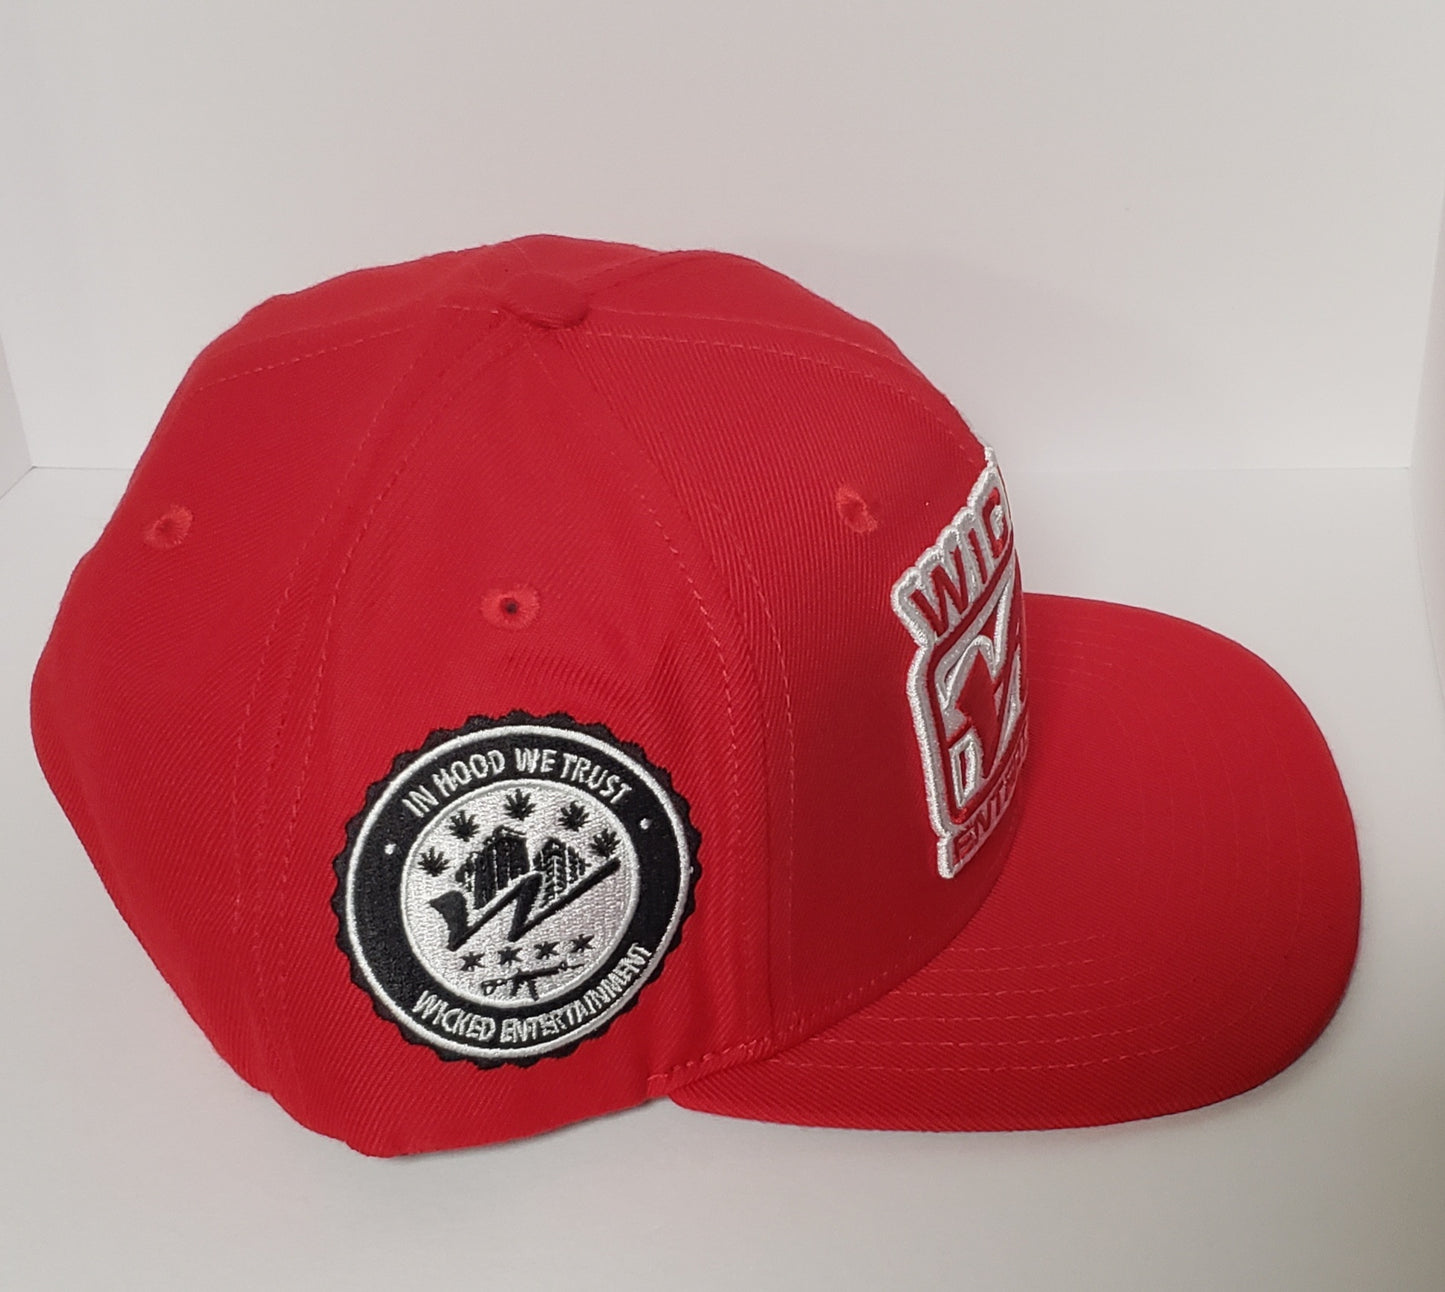 Wicked Logo Snapback hat - Red/Red